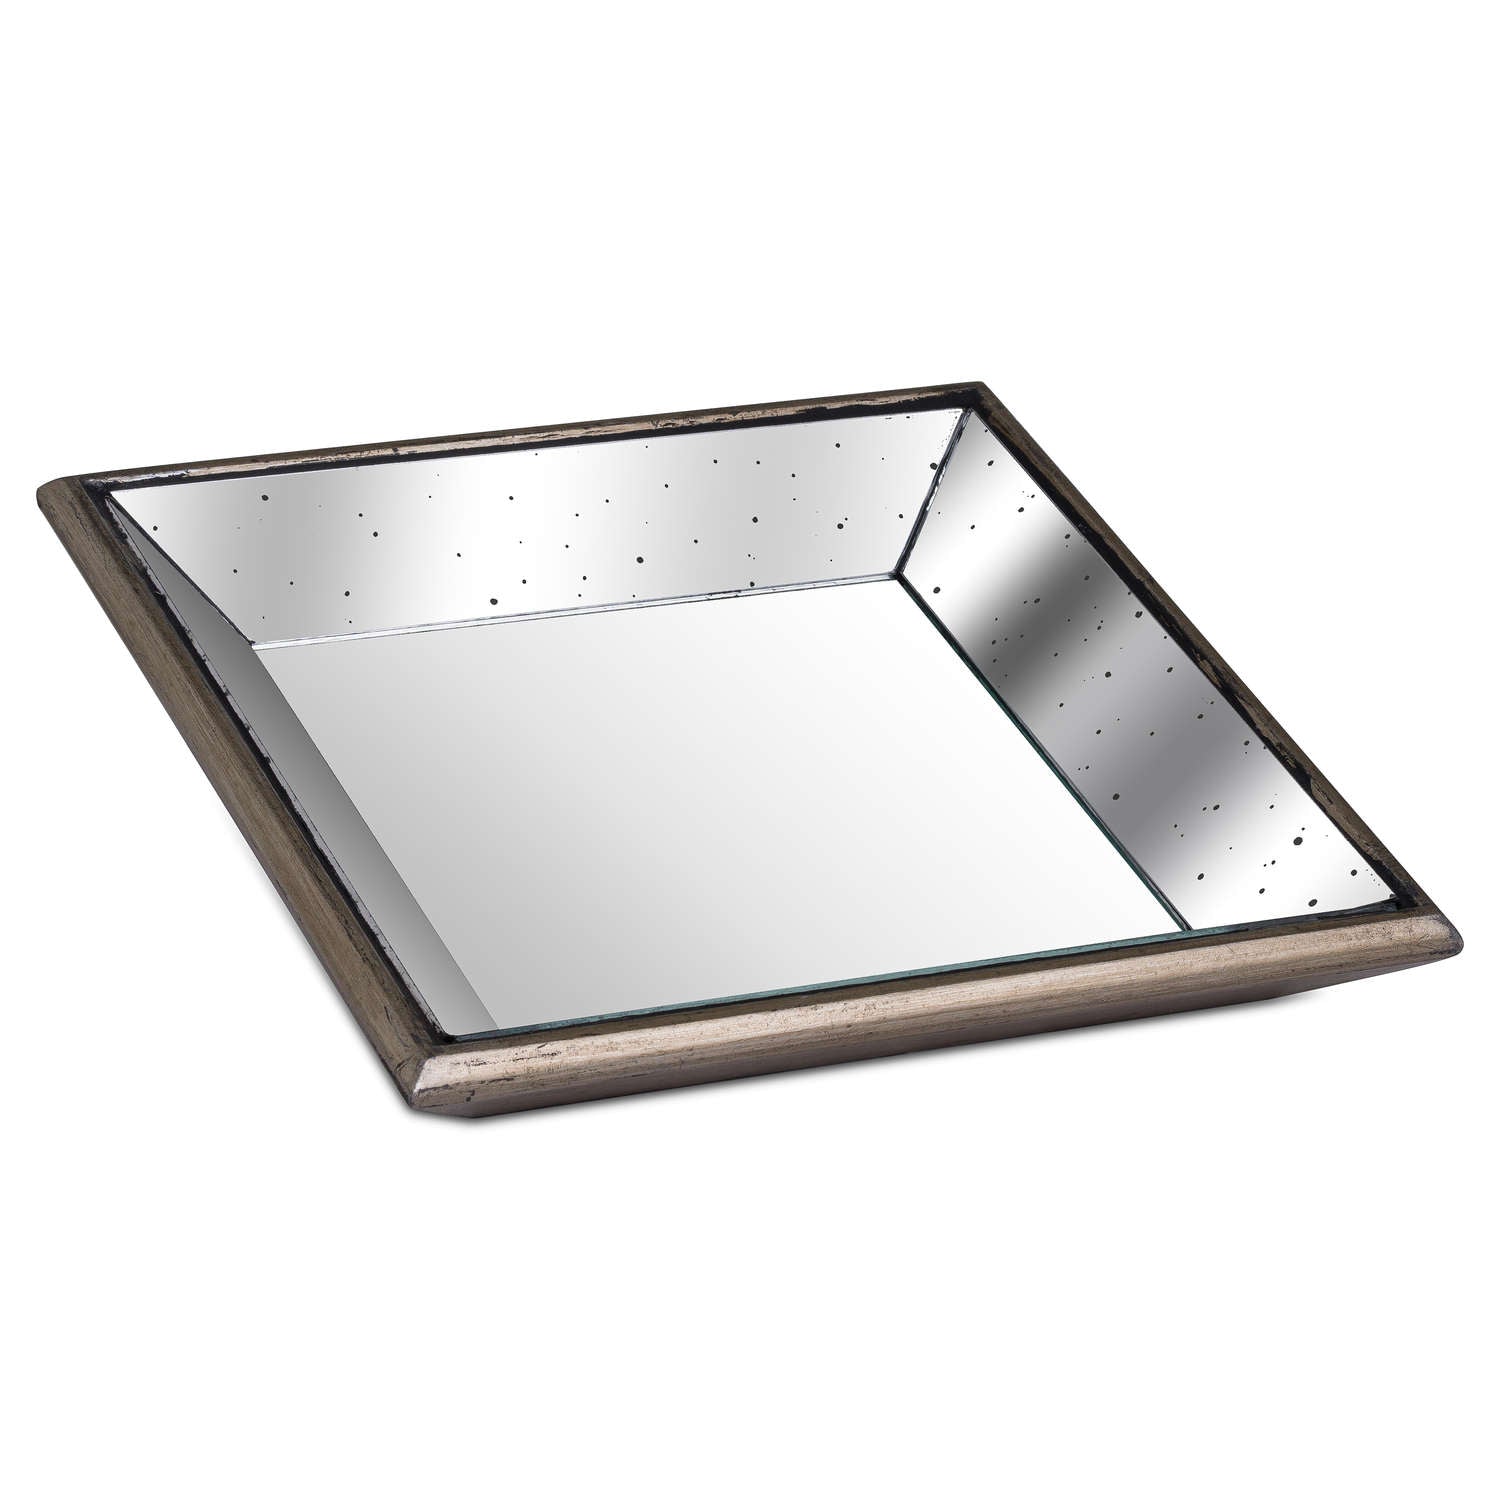 View Astor Distressed Mirrored Square Tray WWooden Detailing Sml information